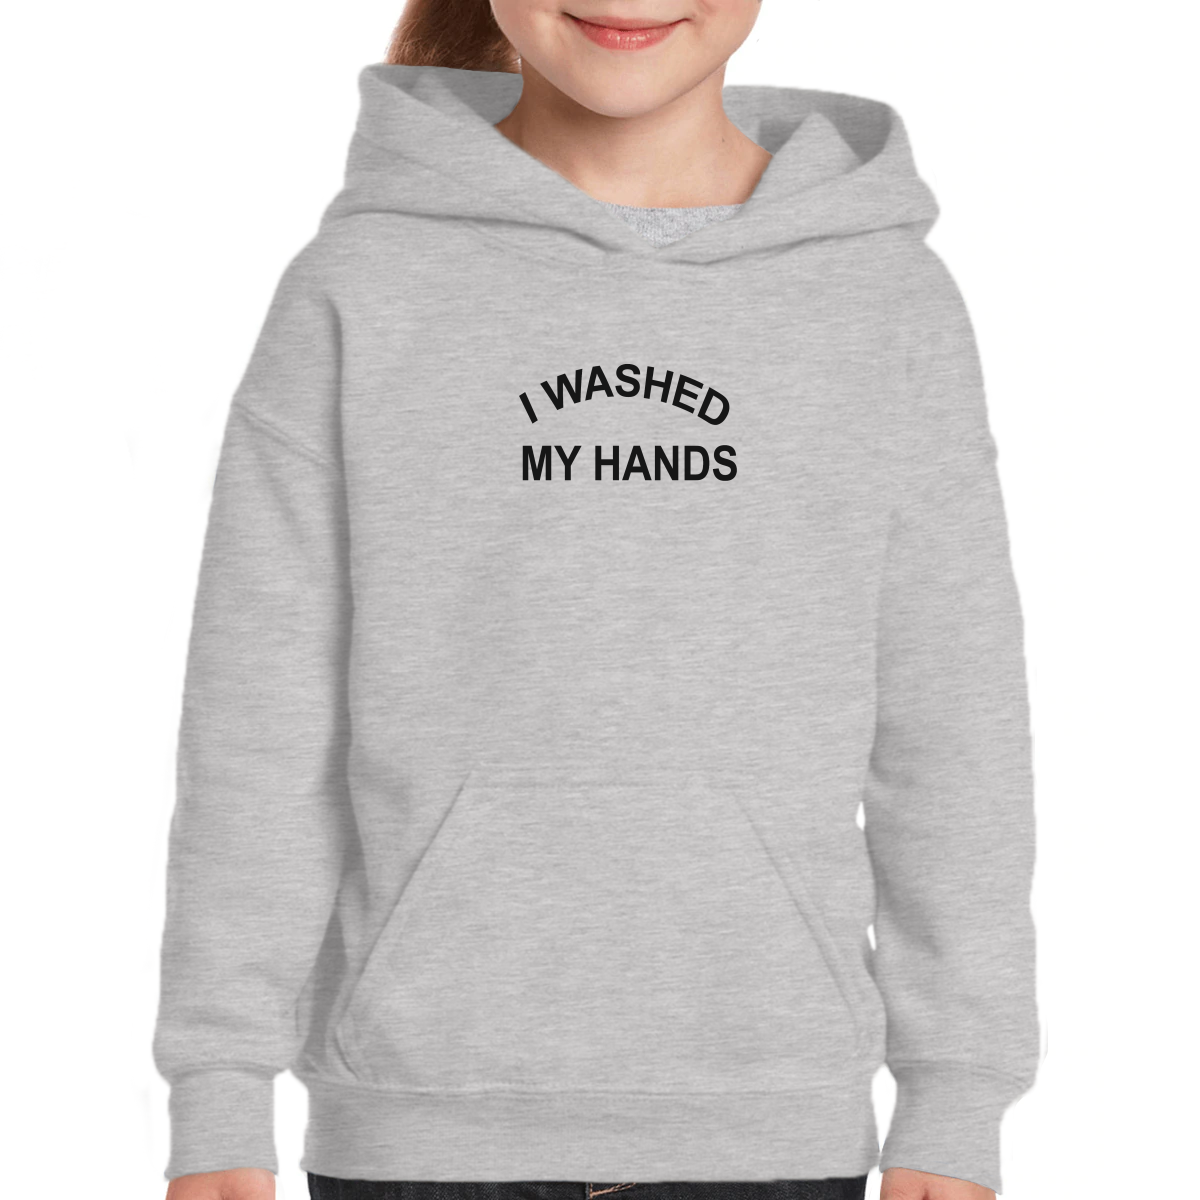 I Washed My Hands Kids Hoodie | Gray